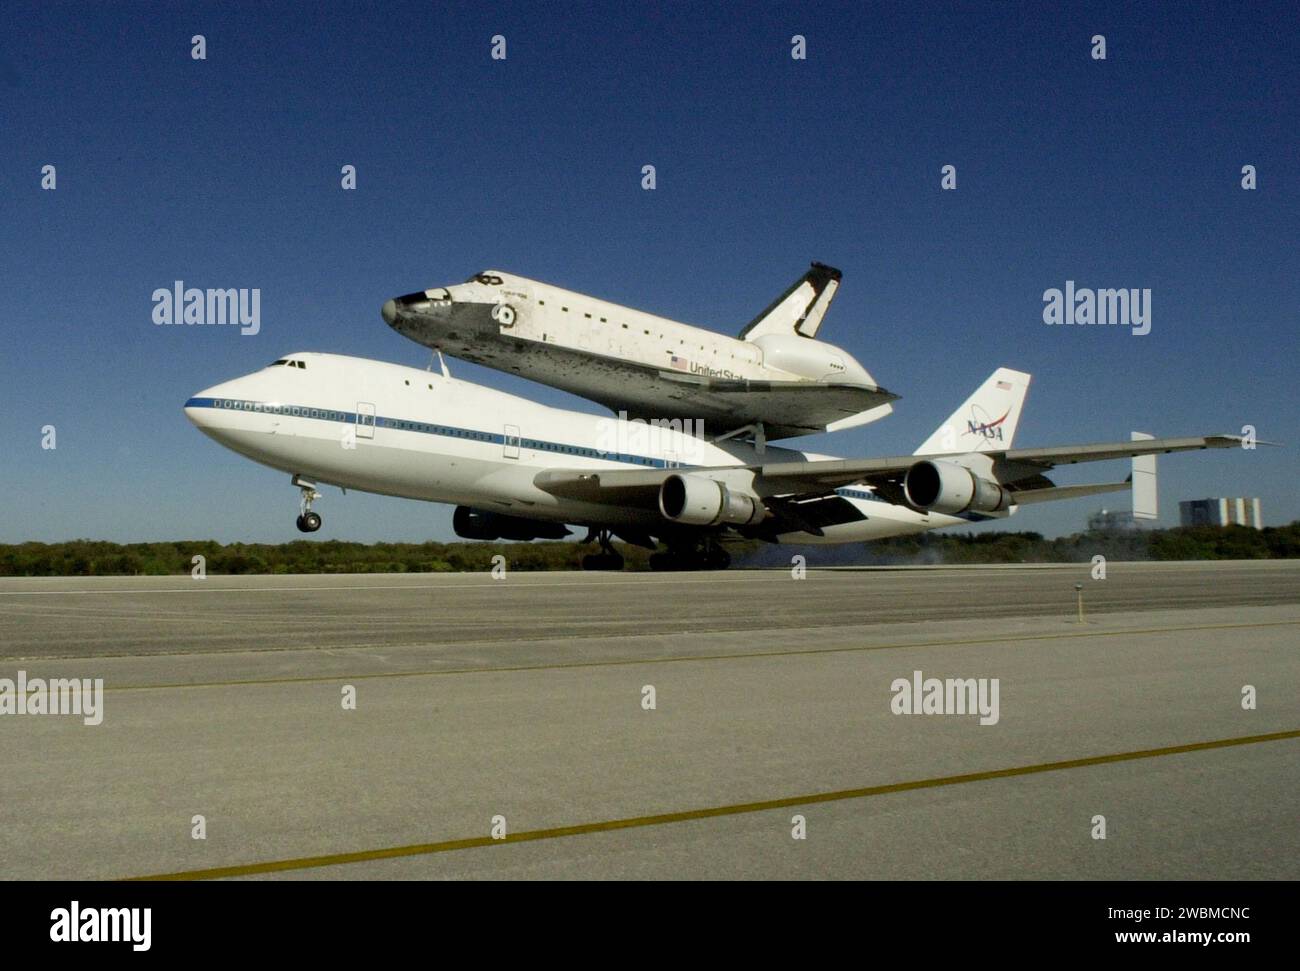 KENNEDY SPACE CENTER, FLA. -- The Shuttle Carrier Aircraft, carrying the orbiter Columbia on its back, touches down on runway 33 at KSC’s Shuttle Landing Facility after a protracted trip from California that began March 1. Unfavorable weather conditions kept it on the ground at Dyess AFB, Texas, until it could return to Florida on March 5 when it landed at the Cape Canaveral Air Force Station Skid Strip. Columbia had to wait for the orbiter Atlantis which had completed a ferry flight to KSC on March 5 to be towed from the SLF before making the final hop to KSC. Columbia is returning from a 17- Stock Photo